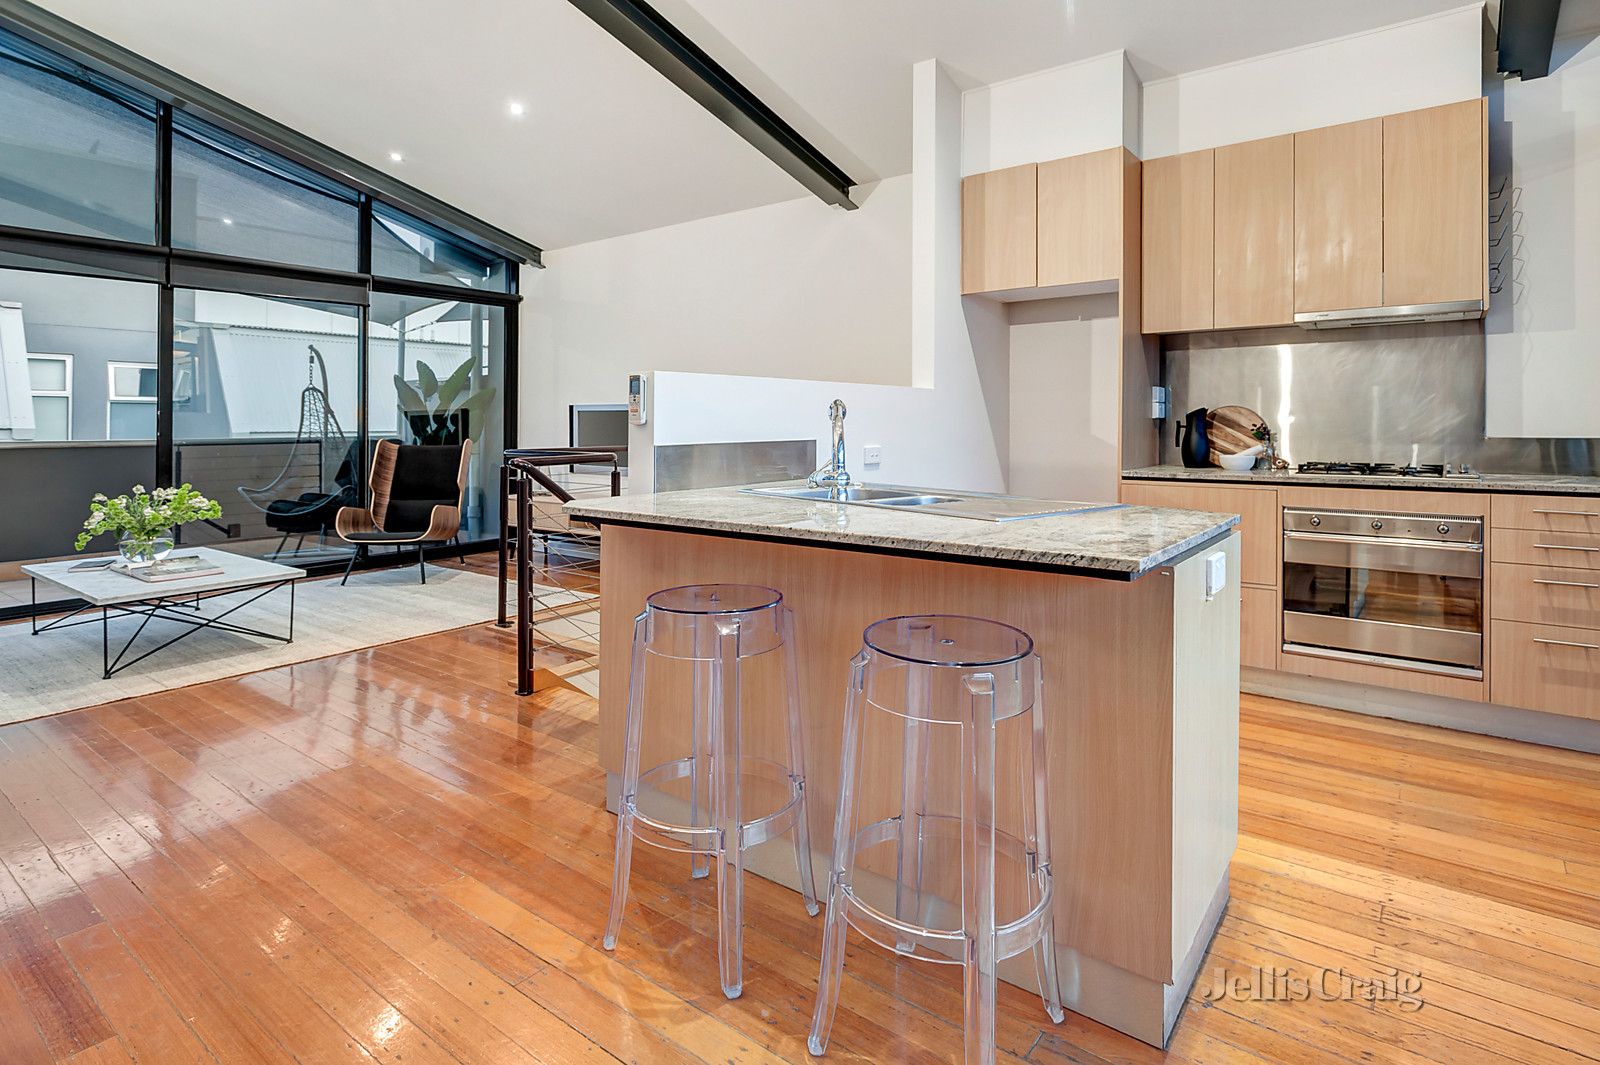 6/176 Noone Street, Clifton Hill VIC 3068, Image 2